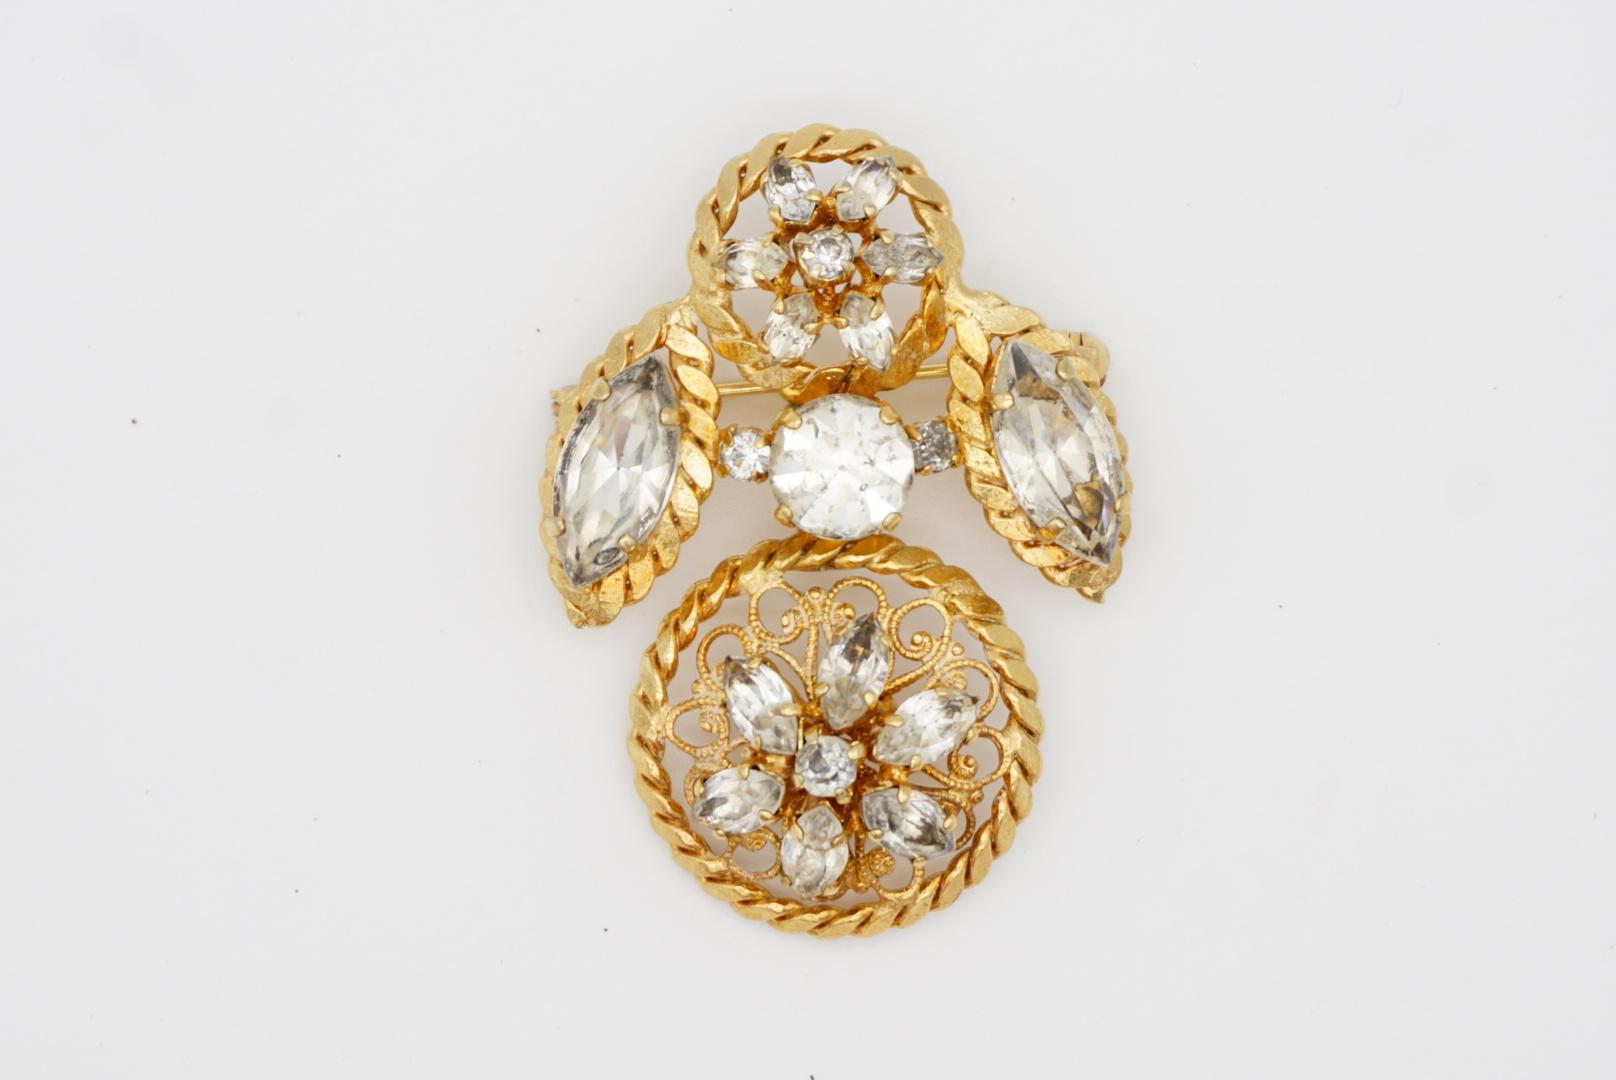 Christian Dior Vintage 1950s Baroque Openwork Crystals Exquisite Gold Brooch For Sale 2